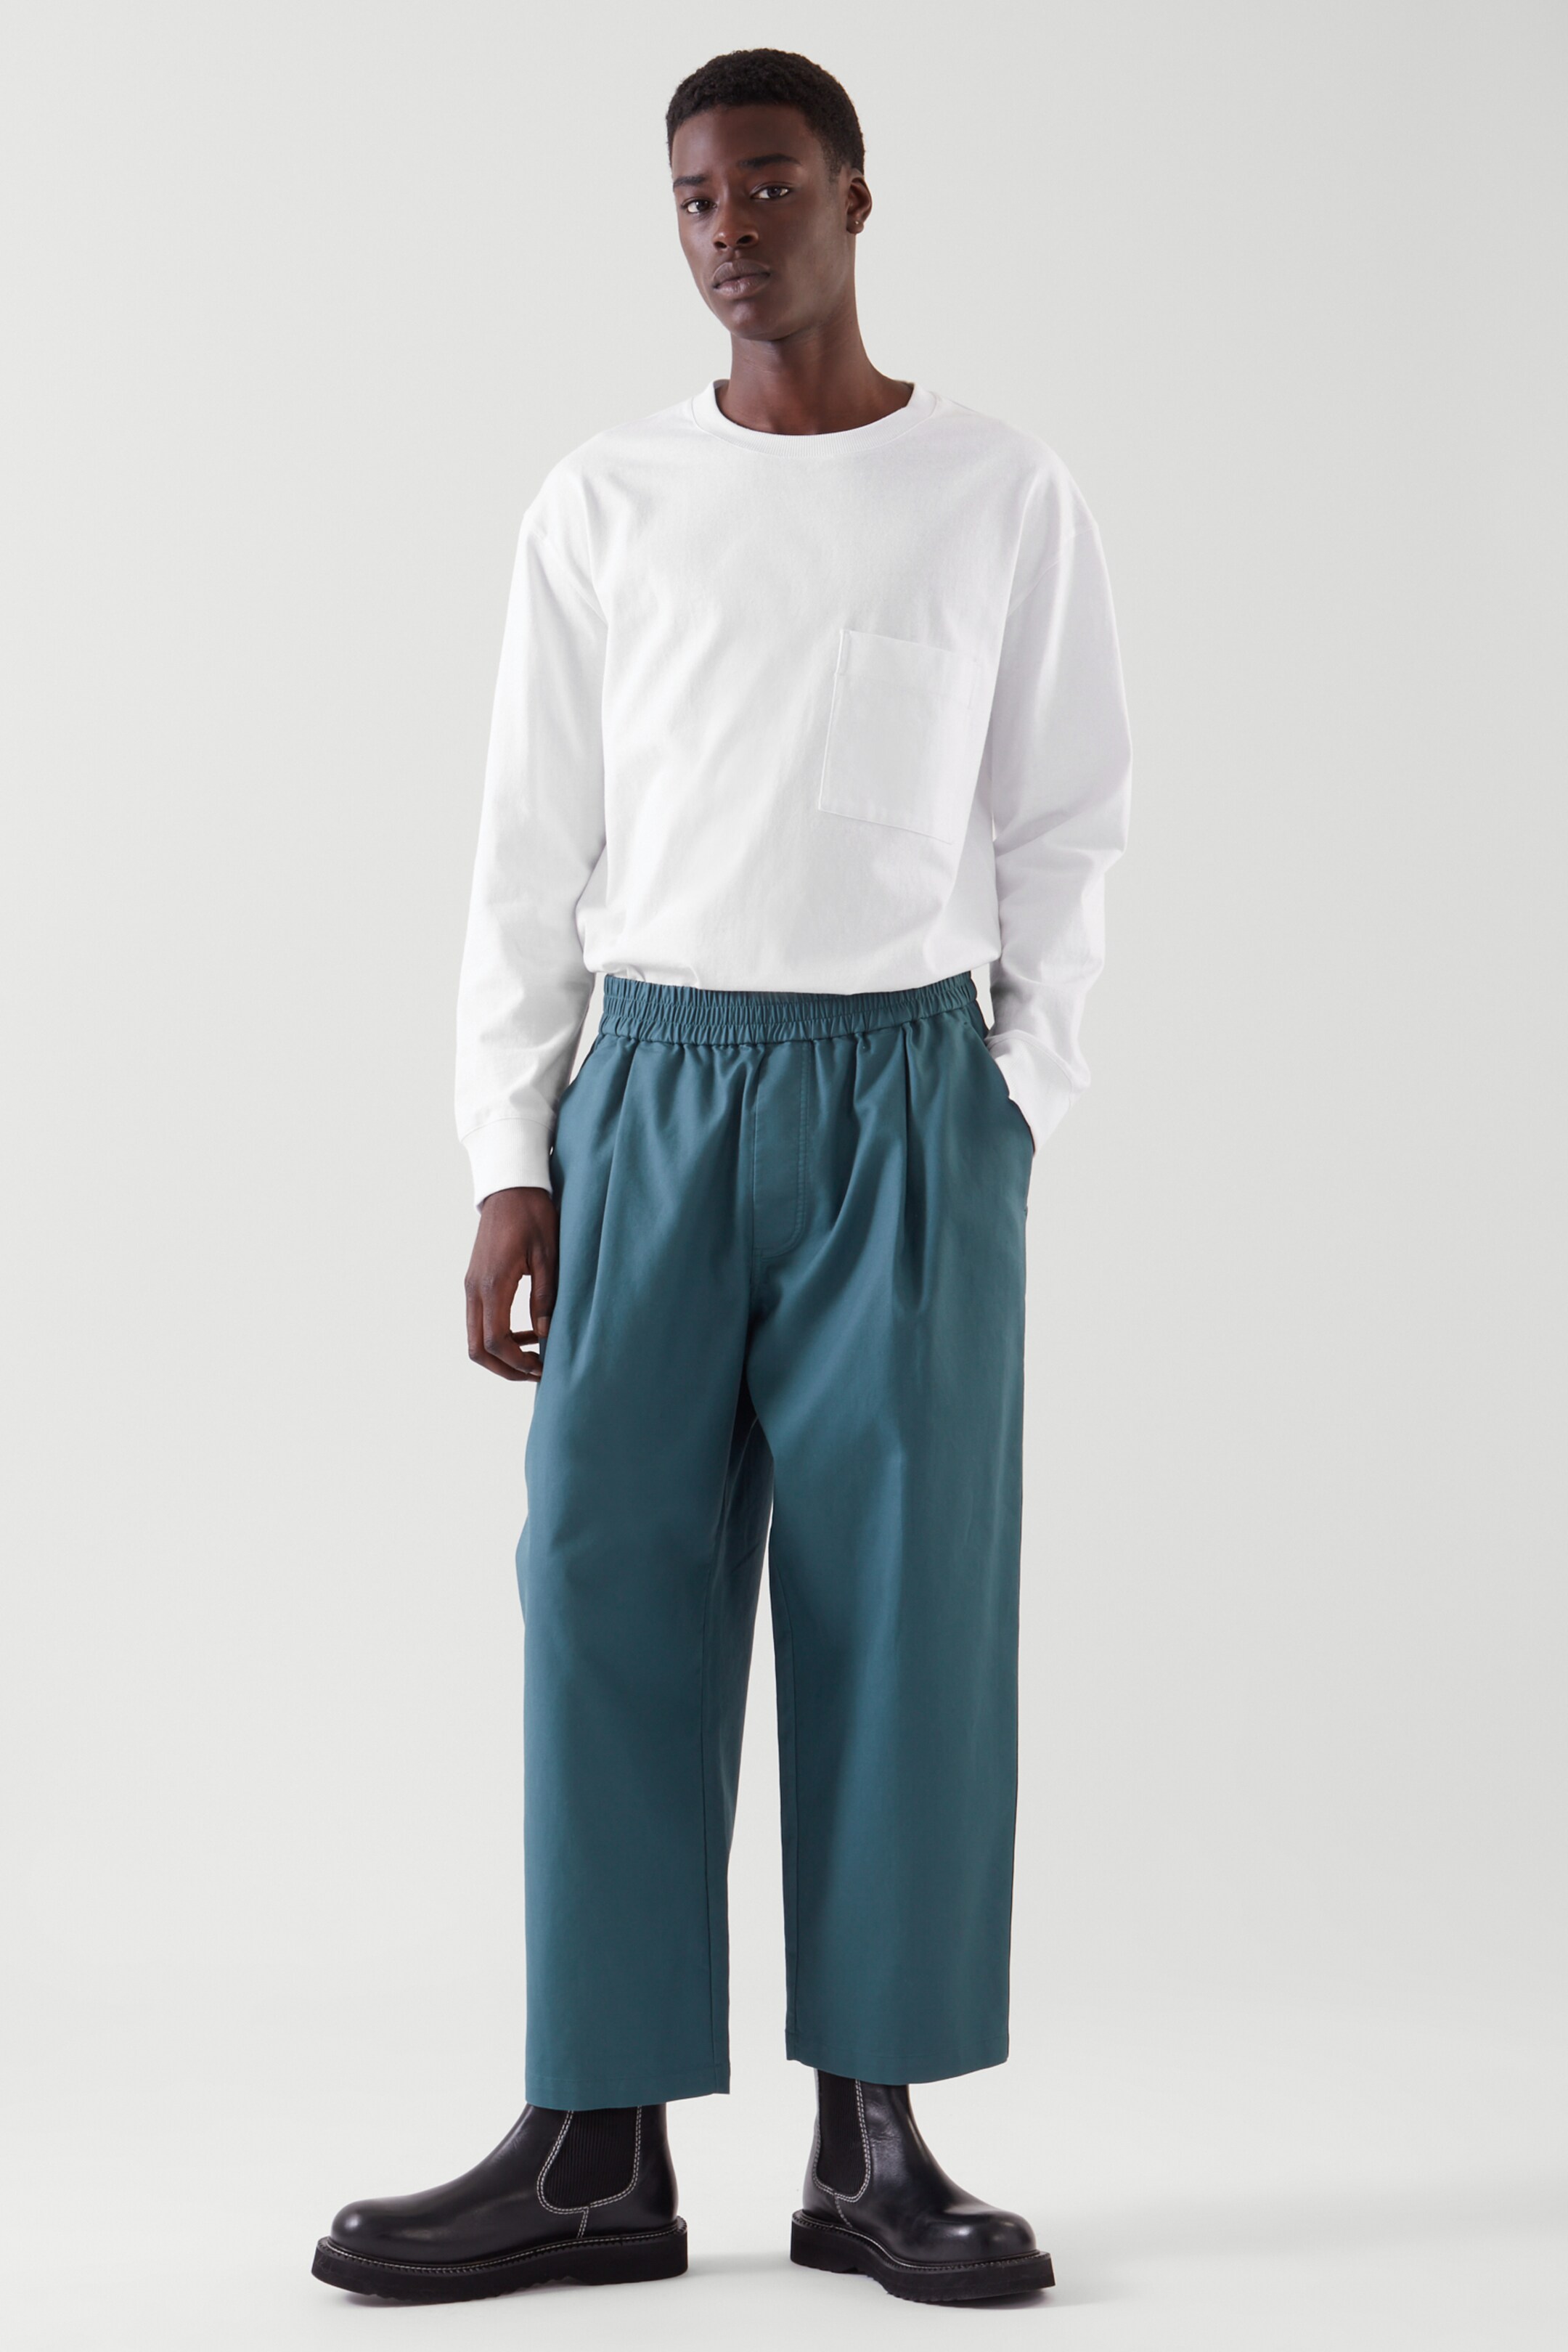 OVERSIZED-FIT ELASTICATED PANTS